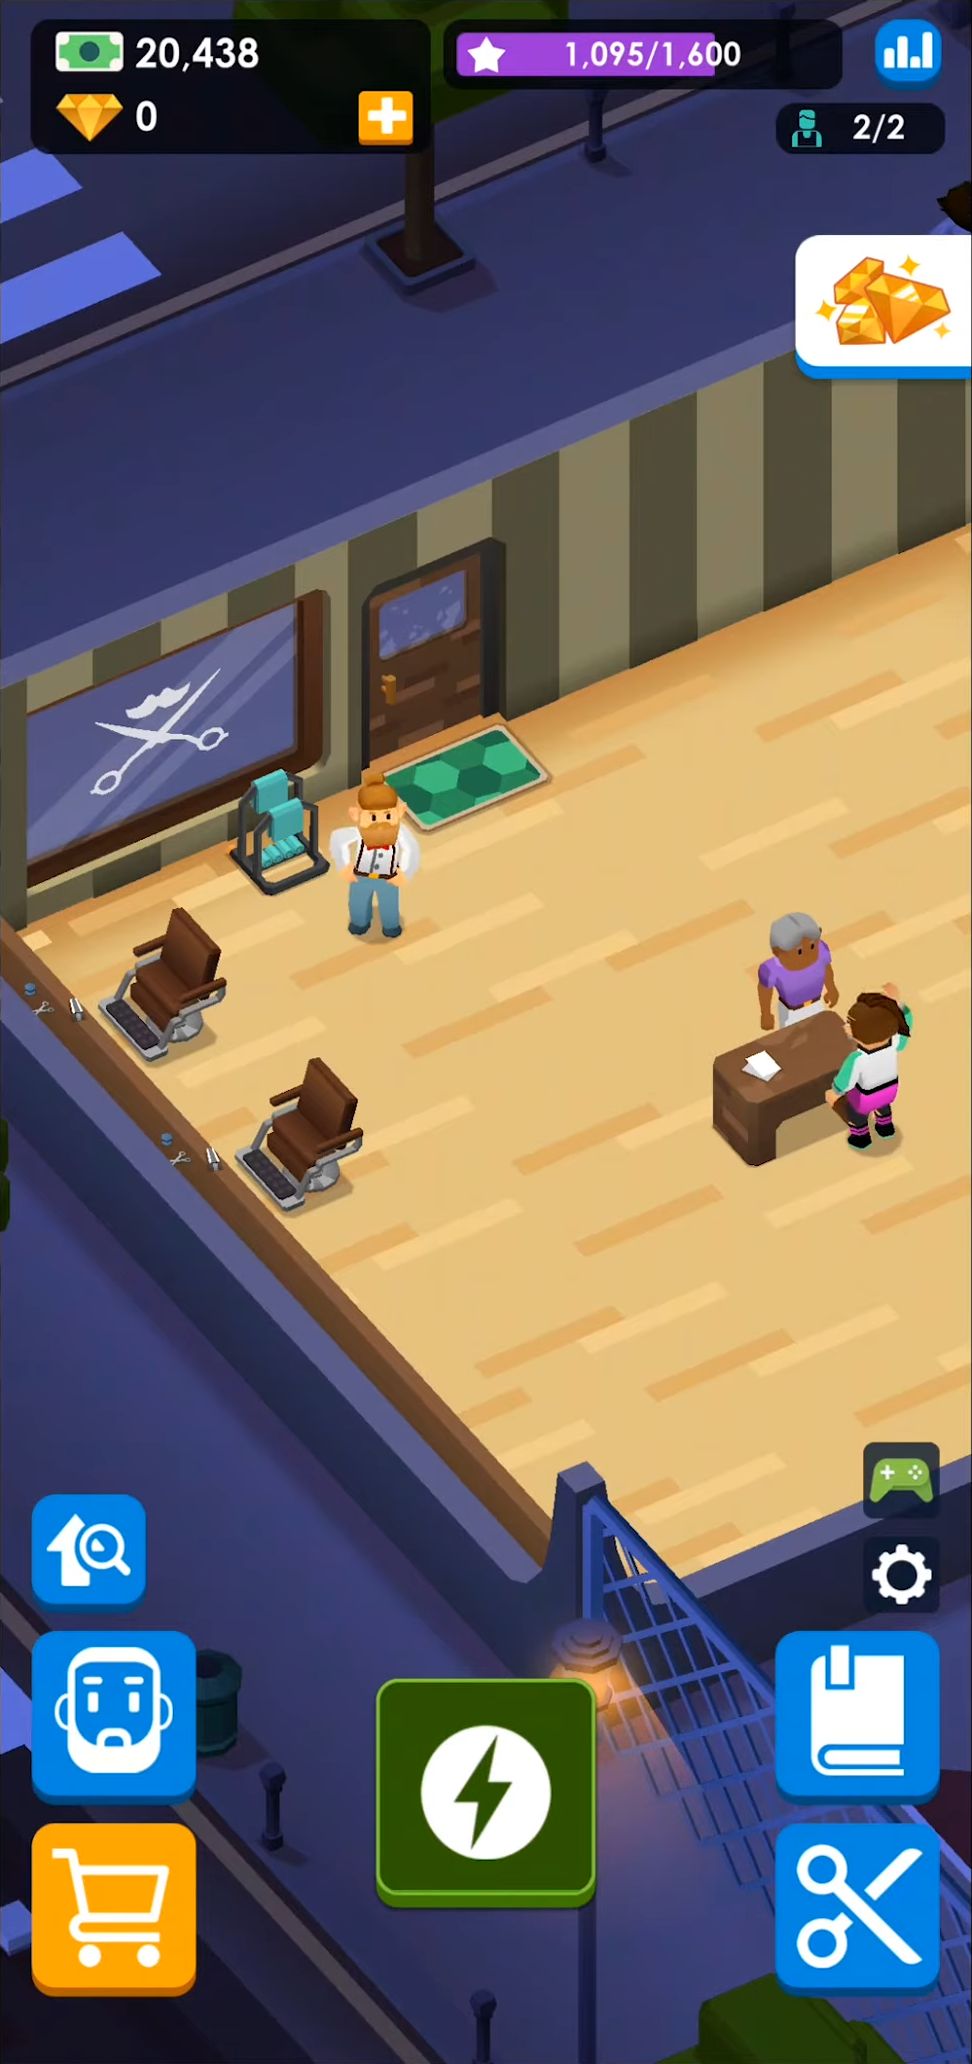 Idle Barber Shop Tycoon - Download & Play for Free Here